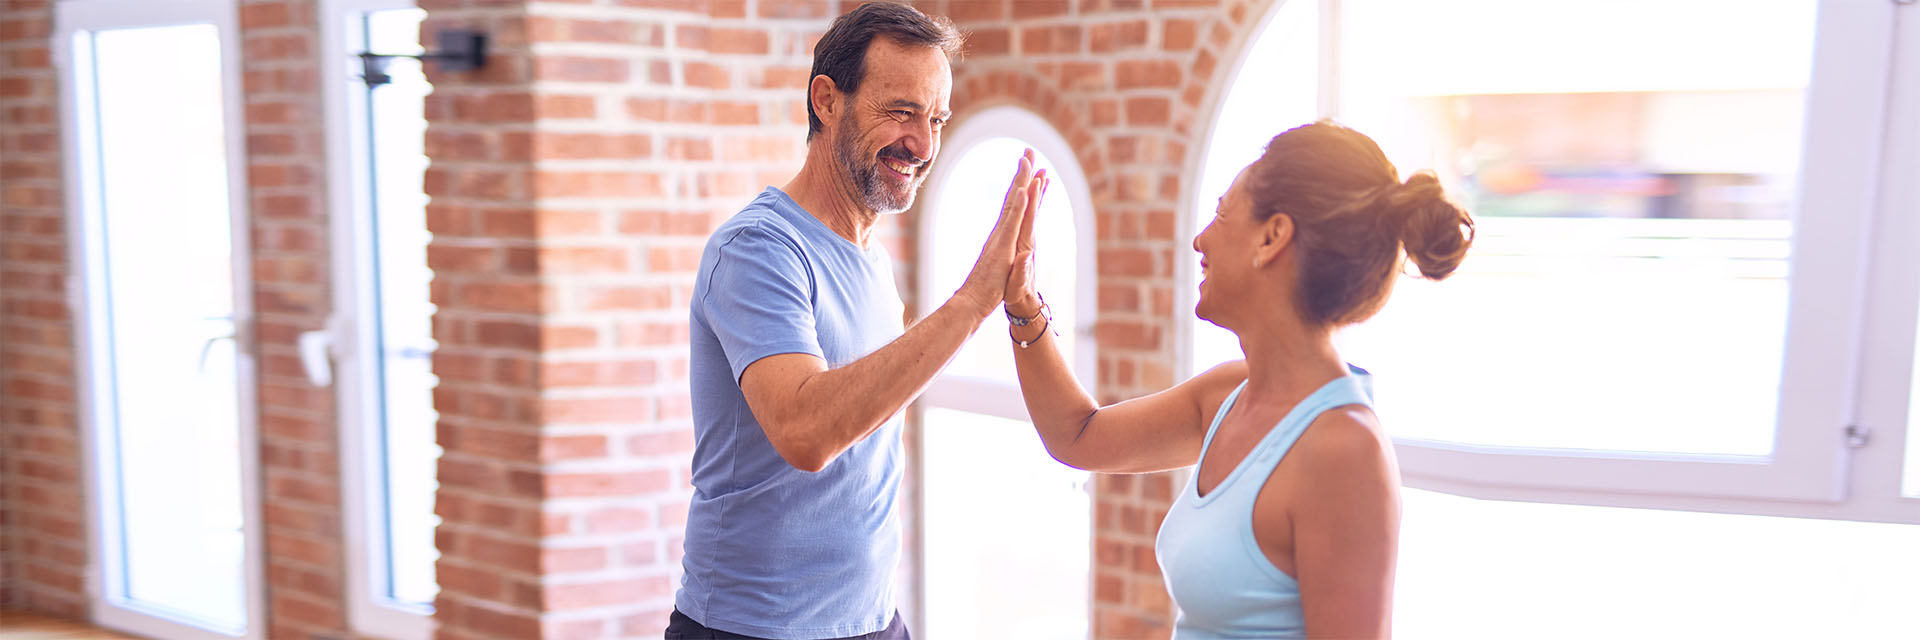 Mature couple high fiving at the gym